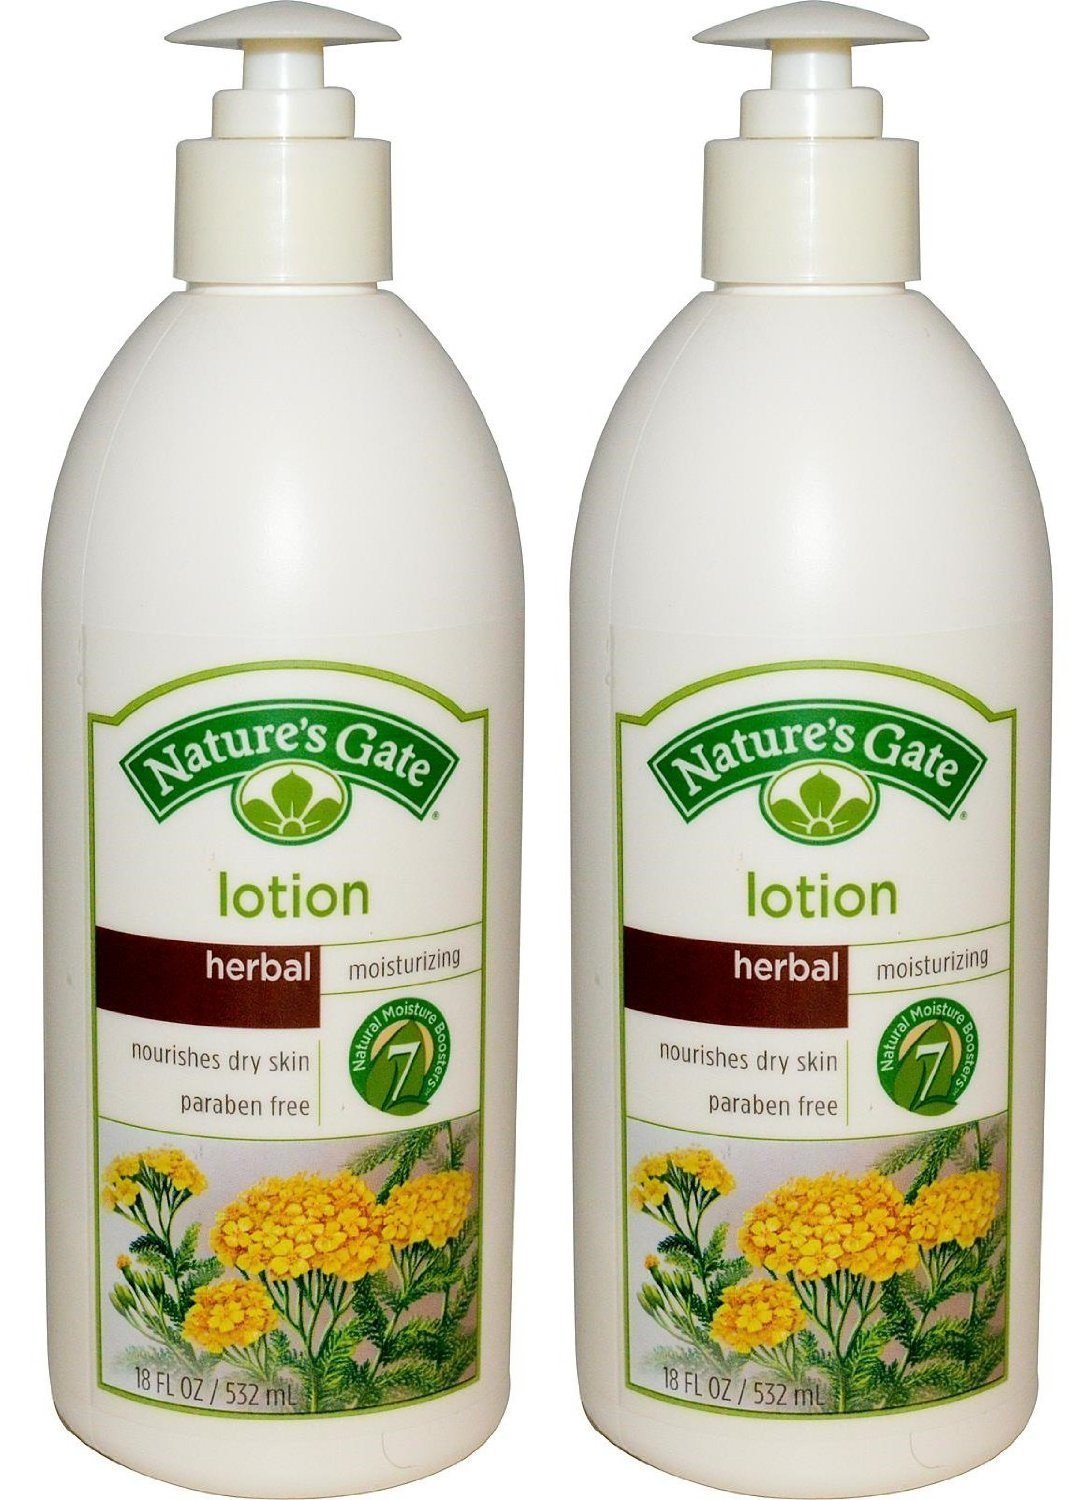 Primary image for Nature's Gate Moisturizing Body Lotion - Herbal - 18 oz - 2 pk